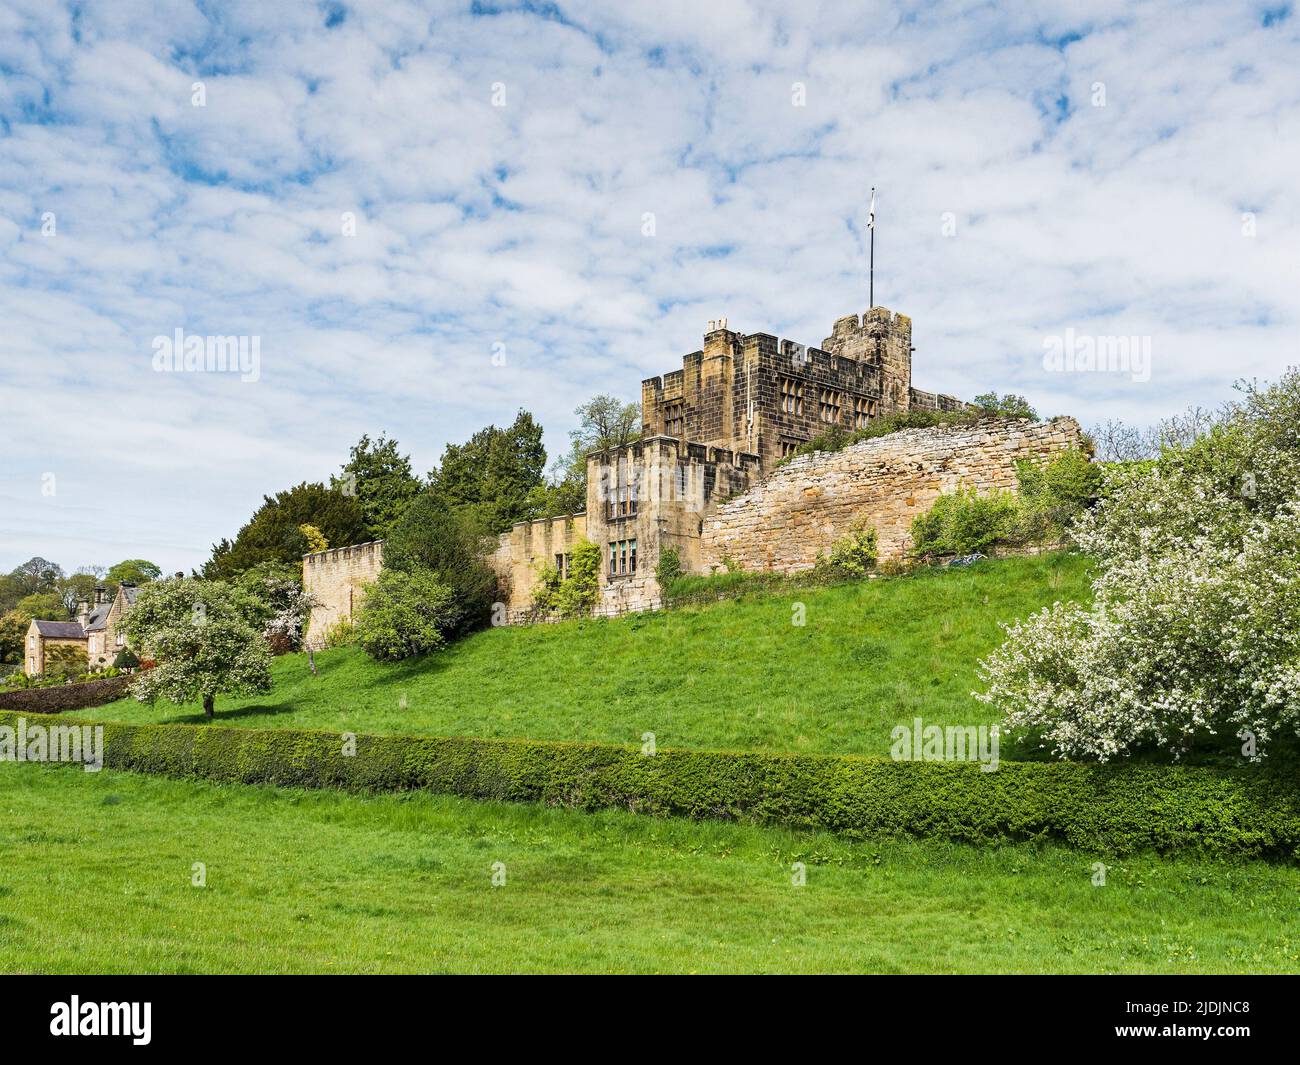 Bothal Castle in the Northumberland village of Bothal dates from the 12th century and is a scheduled ancient monument and stately home. Stock Photo